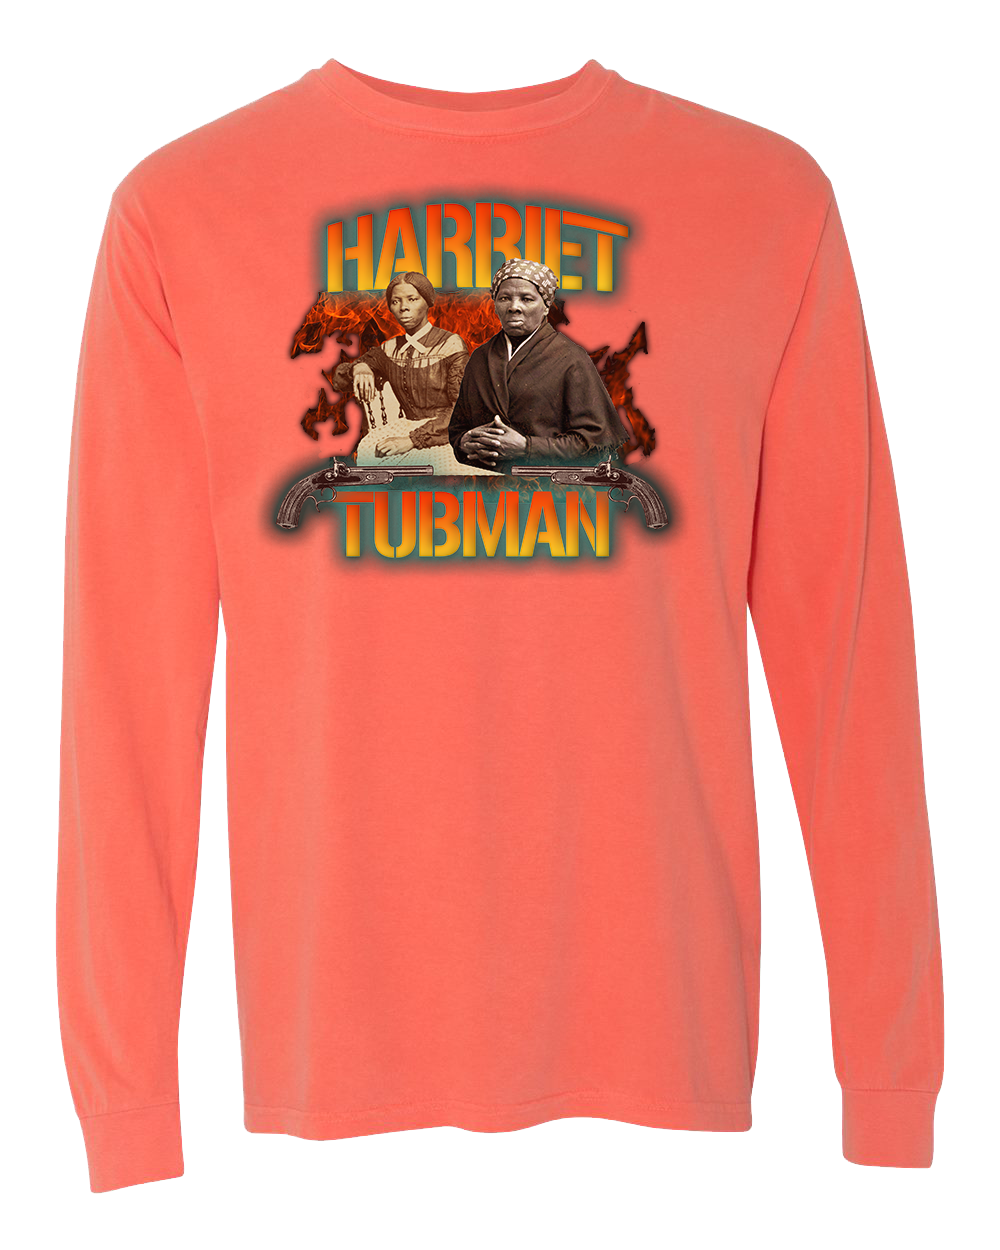 Harriet Tubman Washed Bright Salmon Orange and Seafoam Green Long Sleeve T-Shirt - Vintage 90's Style with Shotguns